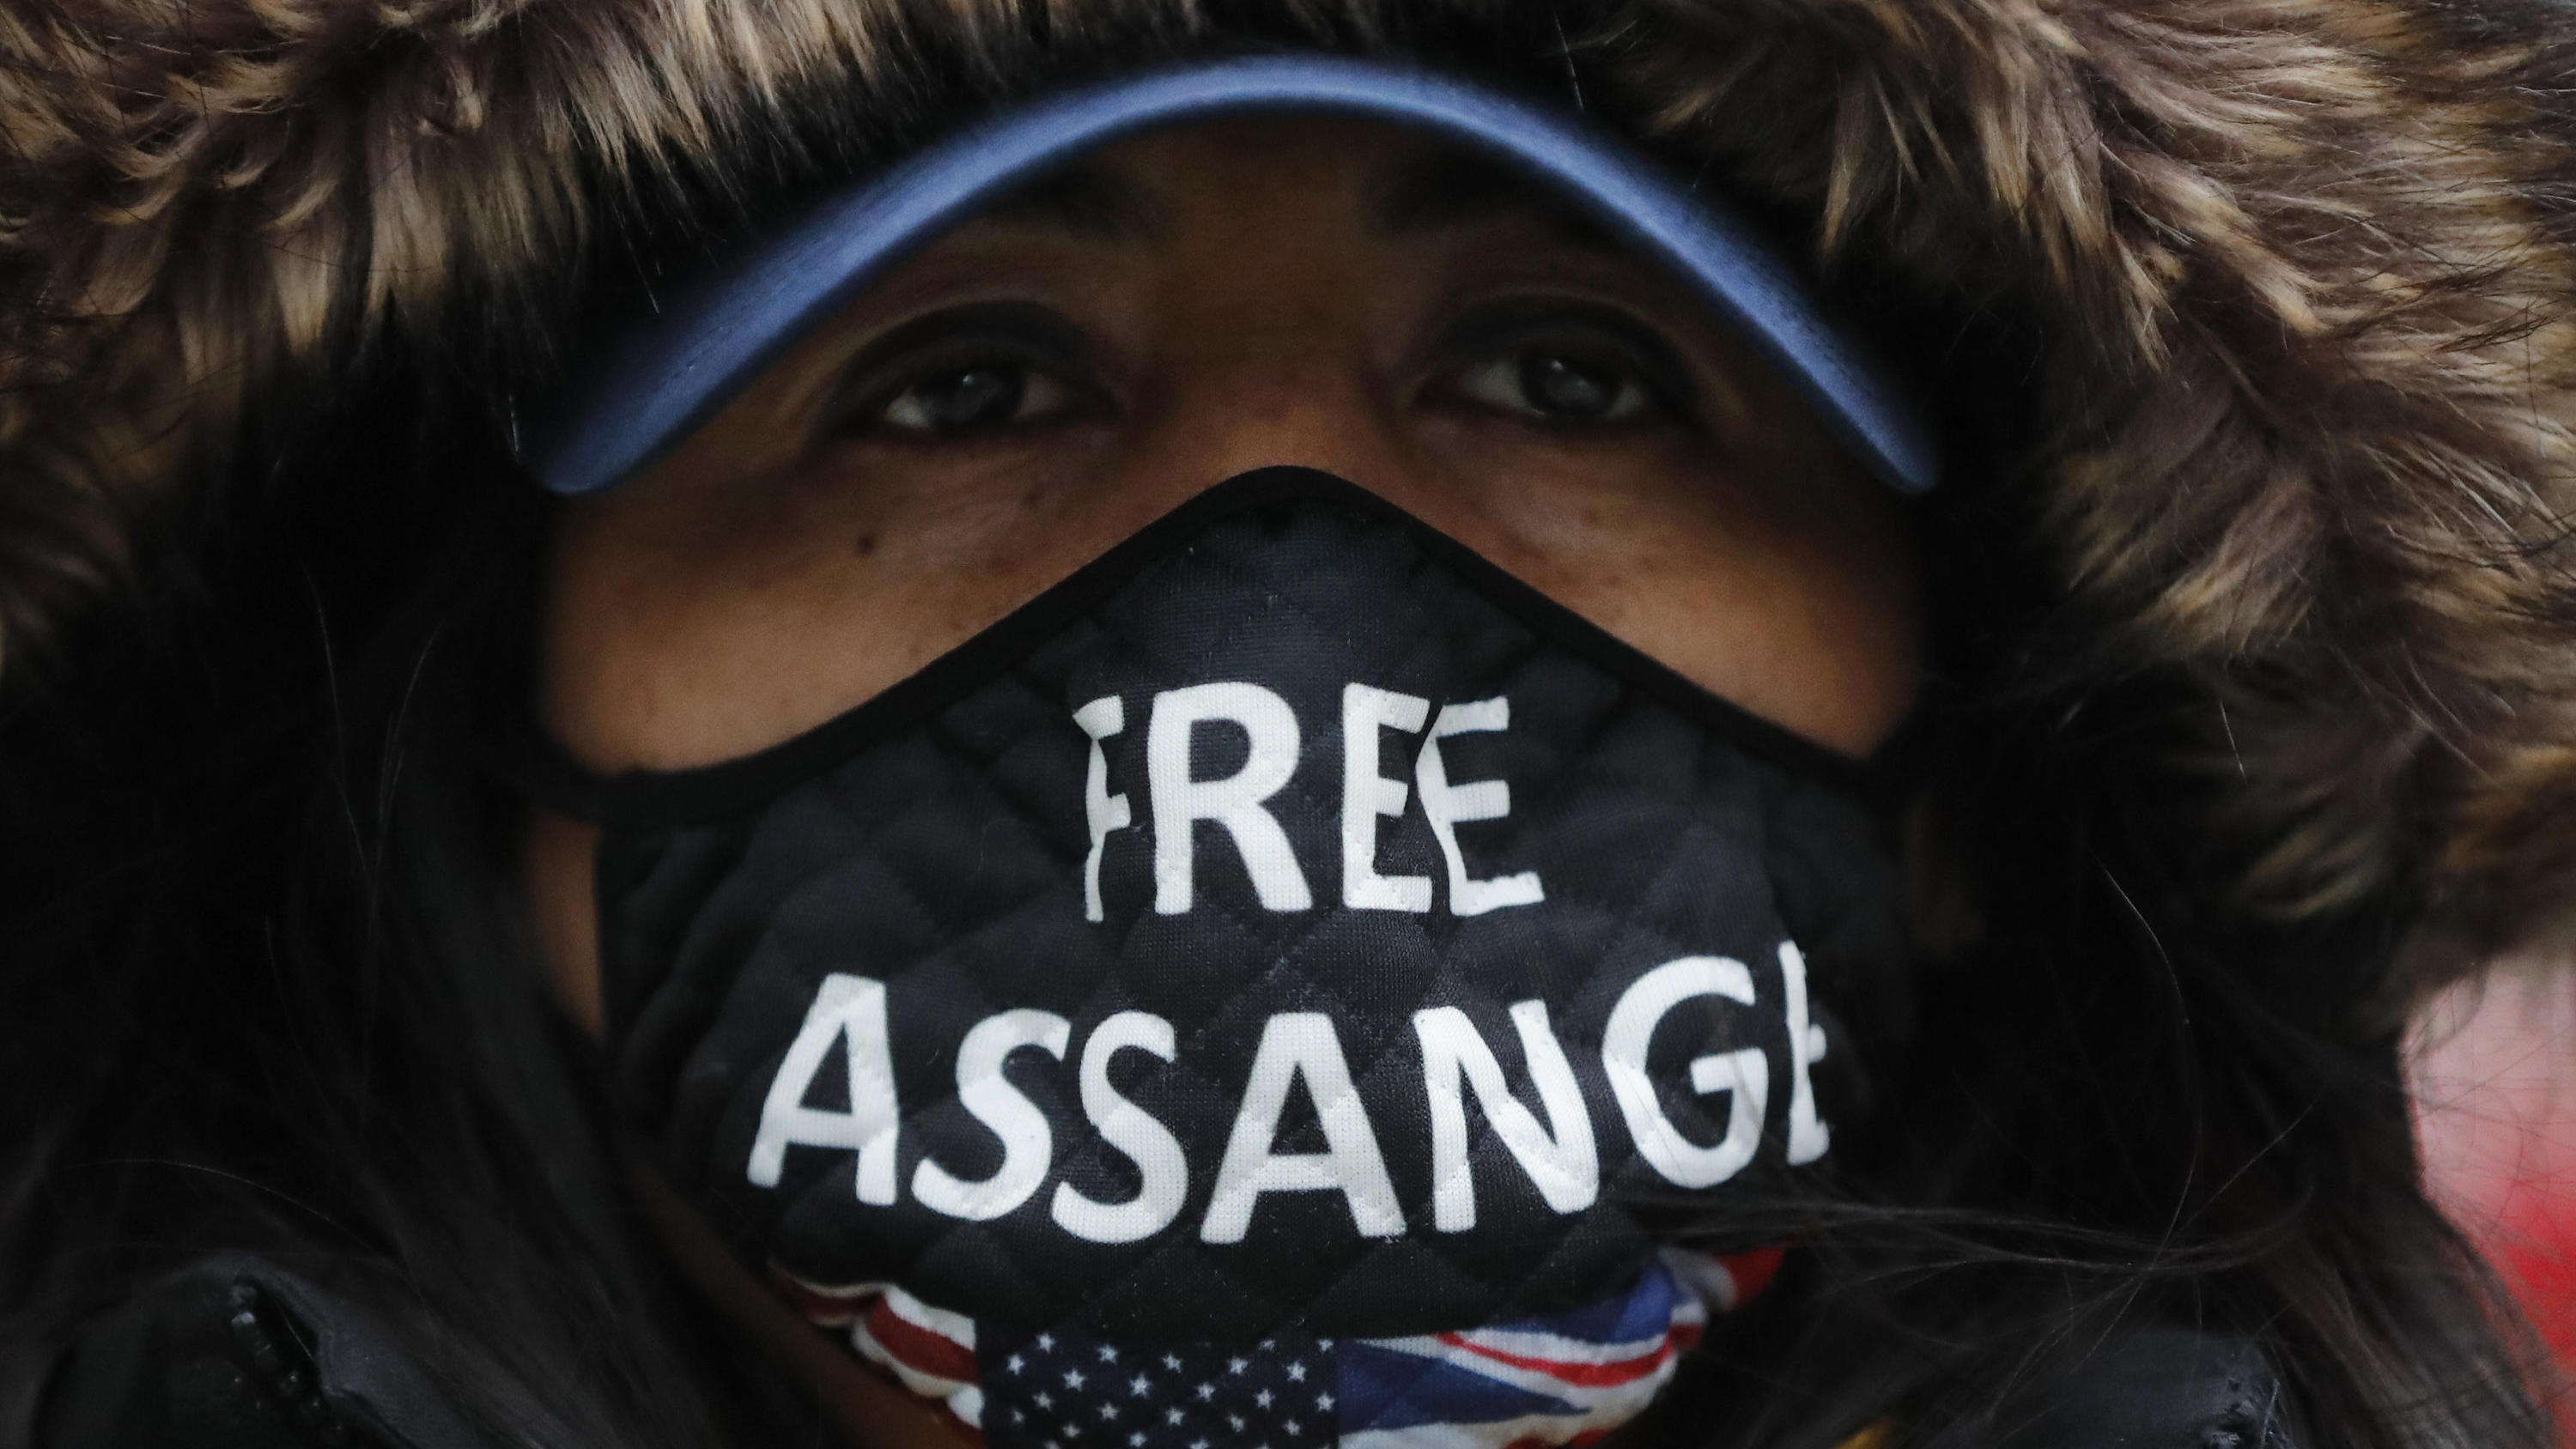 A Julian Assange supporter wears a face mask bearing his name outside the Old Bailey in London, Monday, Jan. 4, 2021. Judgement is to be made by Judge Vanessa Baraitser on Julian Assange's his extradition hearing to the US. Assange has been charged u